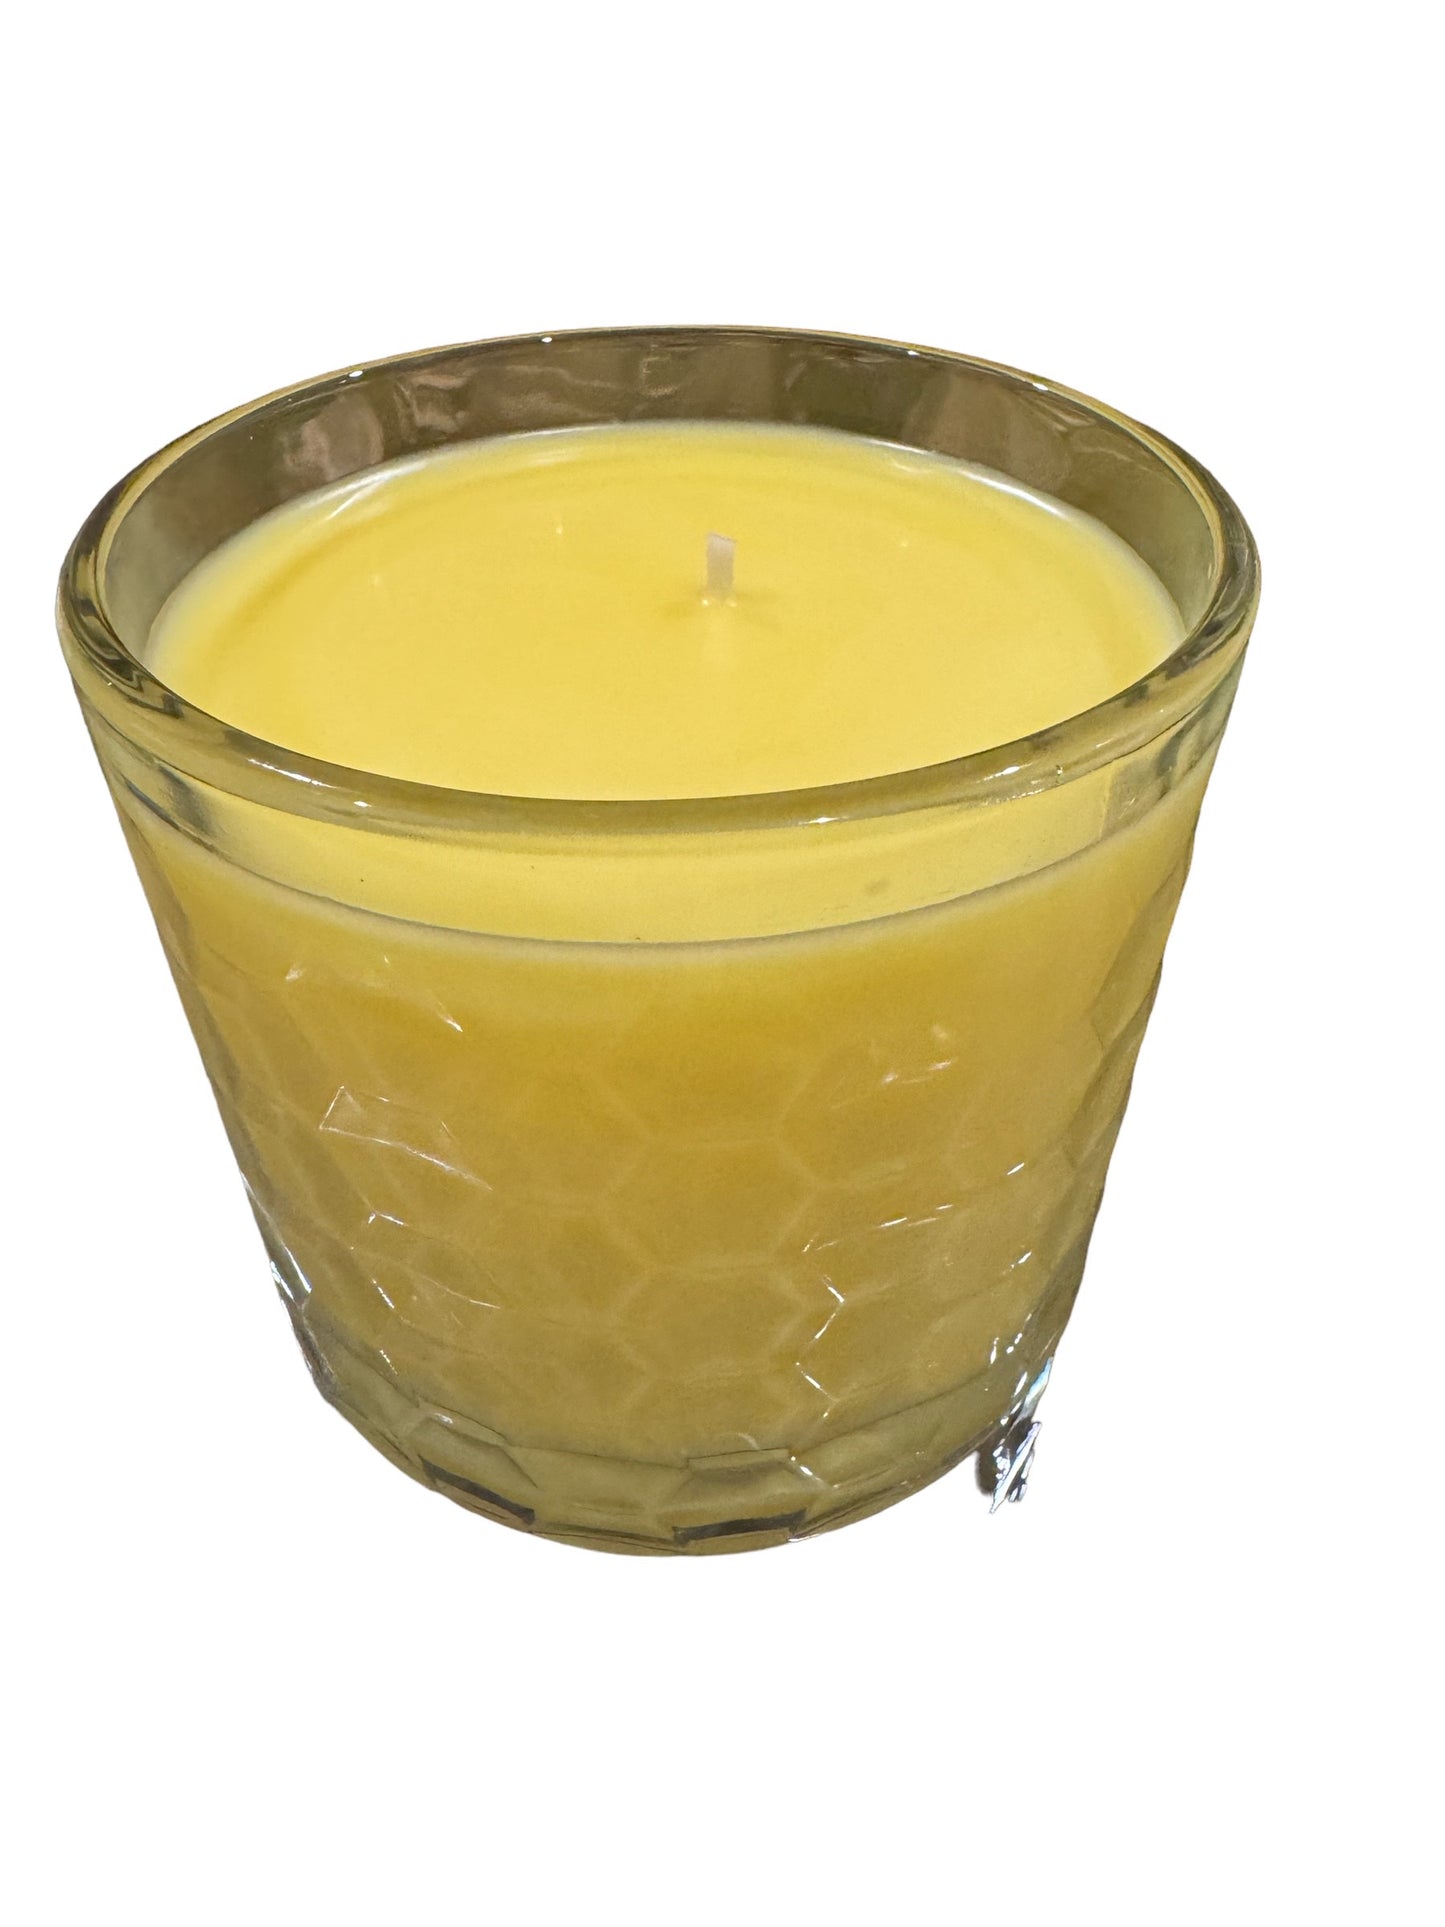 Tropical 18.2 ounce homemade crystal beveled yellow candle.